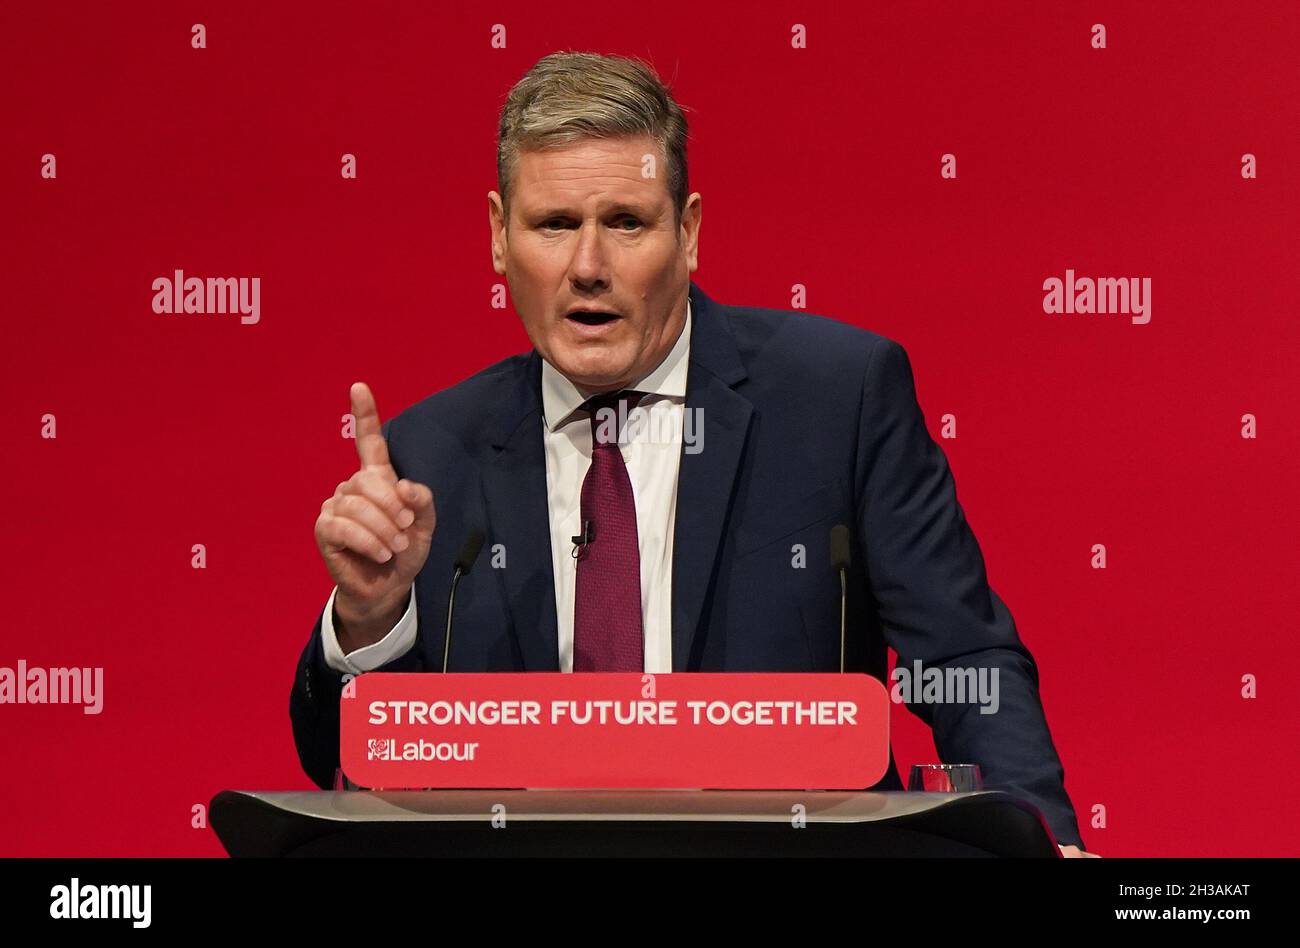 File photo dated 29/09/21 of Labour party leader Sir Keir Starmer who has has had to pull out of the Budget after testing positive for Covid-19. The leader of the opposition normally responds to the Chancellor's statement in the Commons but his place at the dispatch box will be taken by shadow chancellor Rachel Reeves. Shadow business secretary Ed Miliband is standing in for Sir Keir at Prime Minister's Questions. Stock Photo